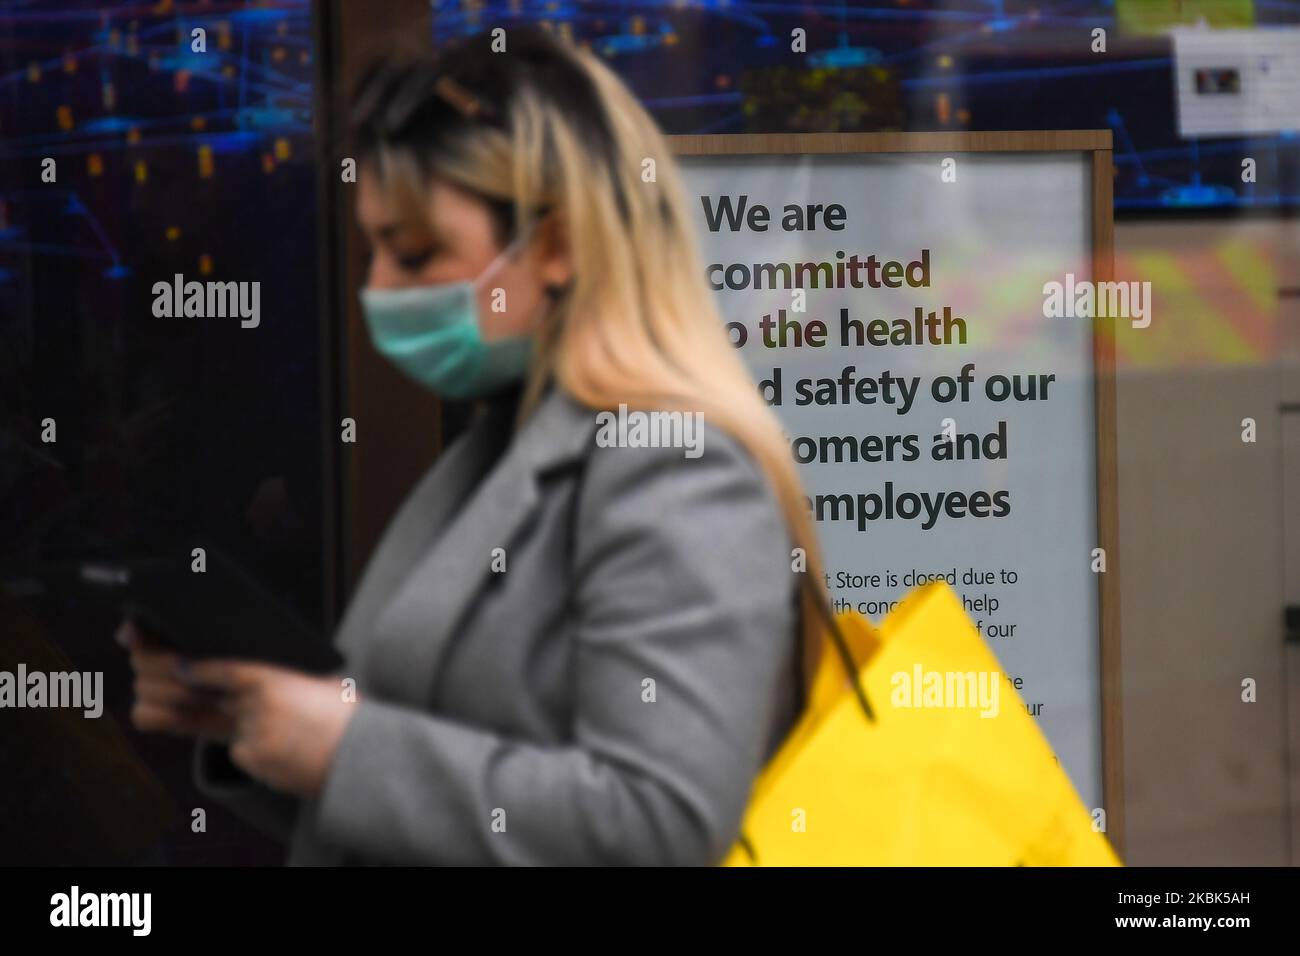 A woman wears a mask as she stands aside a closed Microsoft Store in Oxford Circus on March 17, 2020 in London, England. Boris Johnson held the first of his public daily briefings on the Coronavirus outbreak yesterday and told the public to avoid theatres and pubs and to work from home where possible. The number of people infected with COVID-19 in the UK has passed 1500 with 55 deaths. (Photo by Alberto Pezzali/NurPhoto) Stock Photo